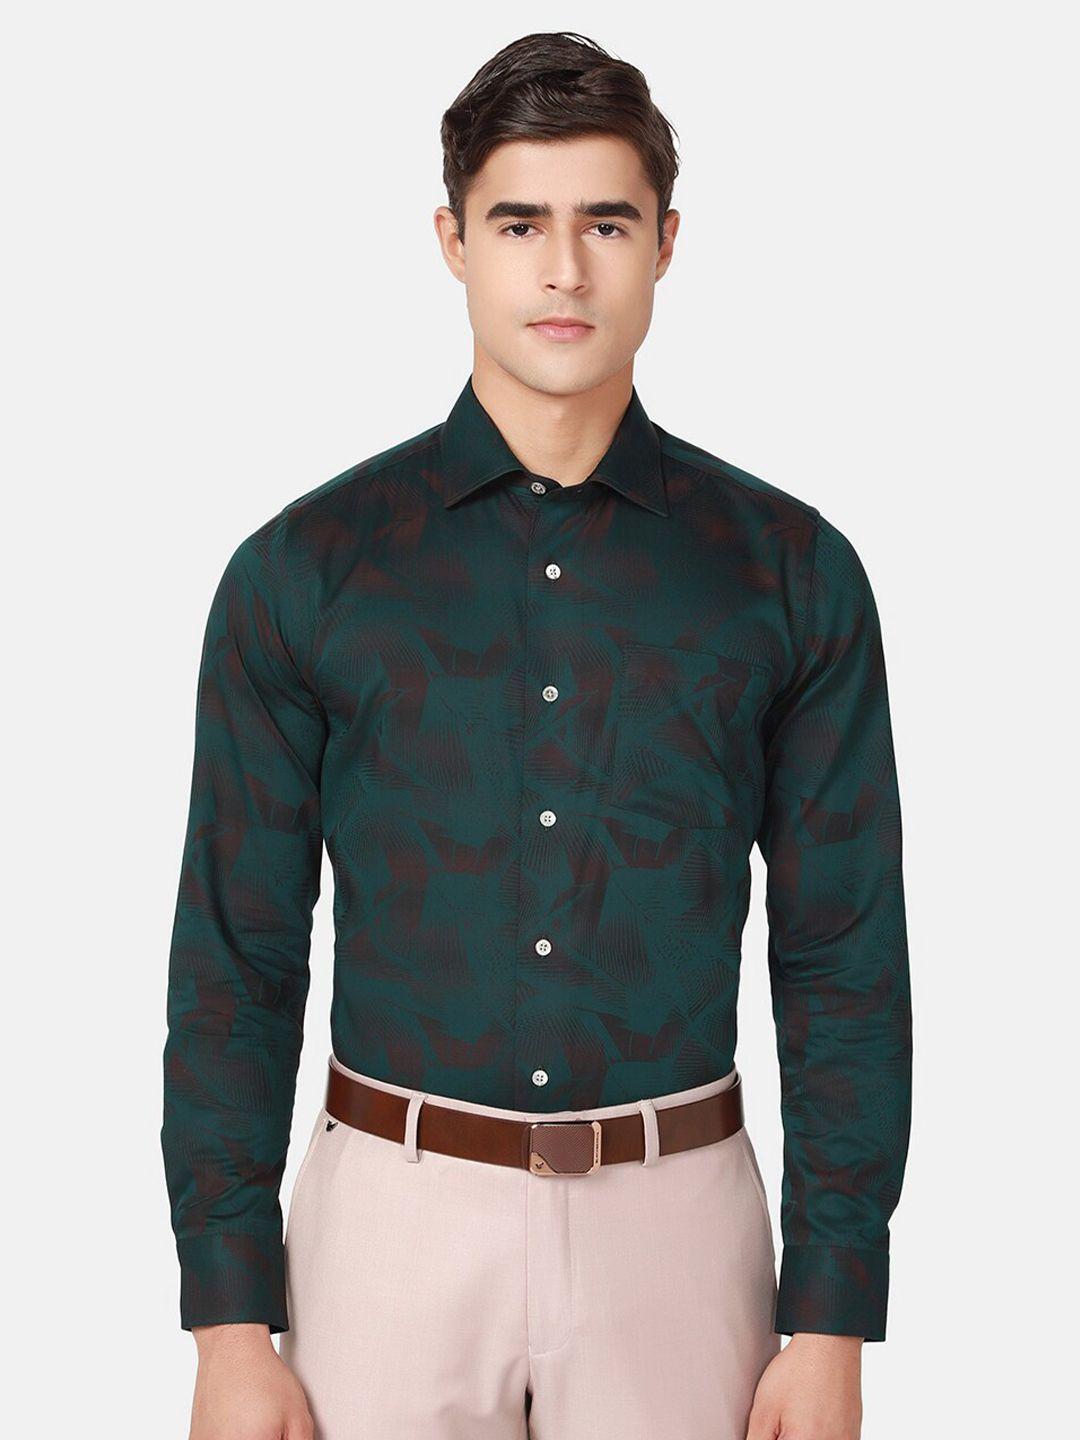 blackberrys-india-slim-abstract-printed-spread-collar-pure-cotton-slim-fit-formal-shirt